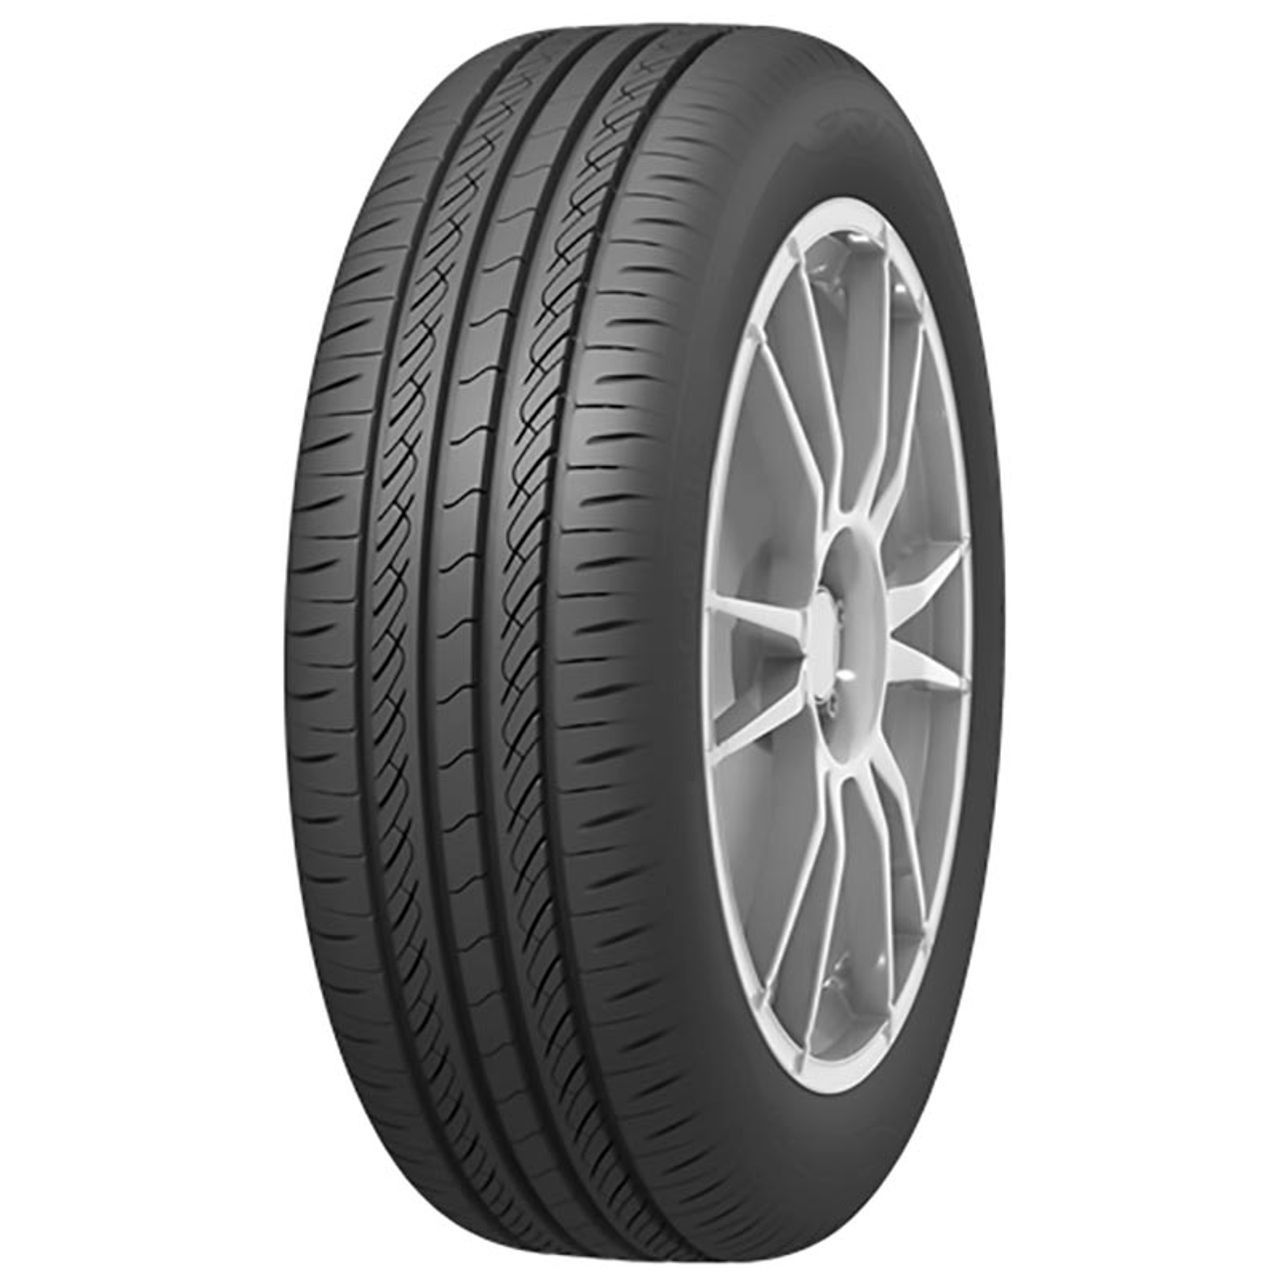 INFINITY ECOSIS 205/55R16 91V BSW